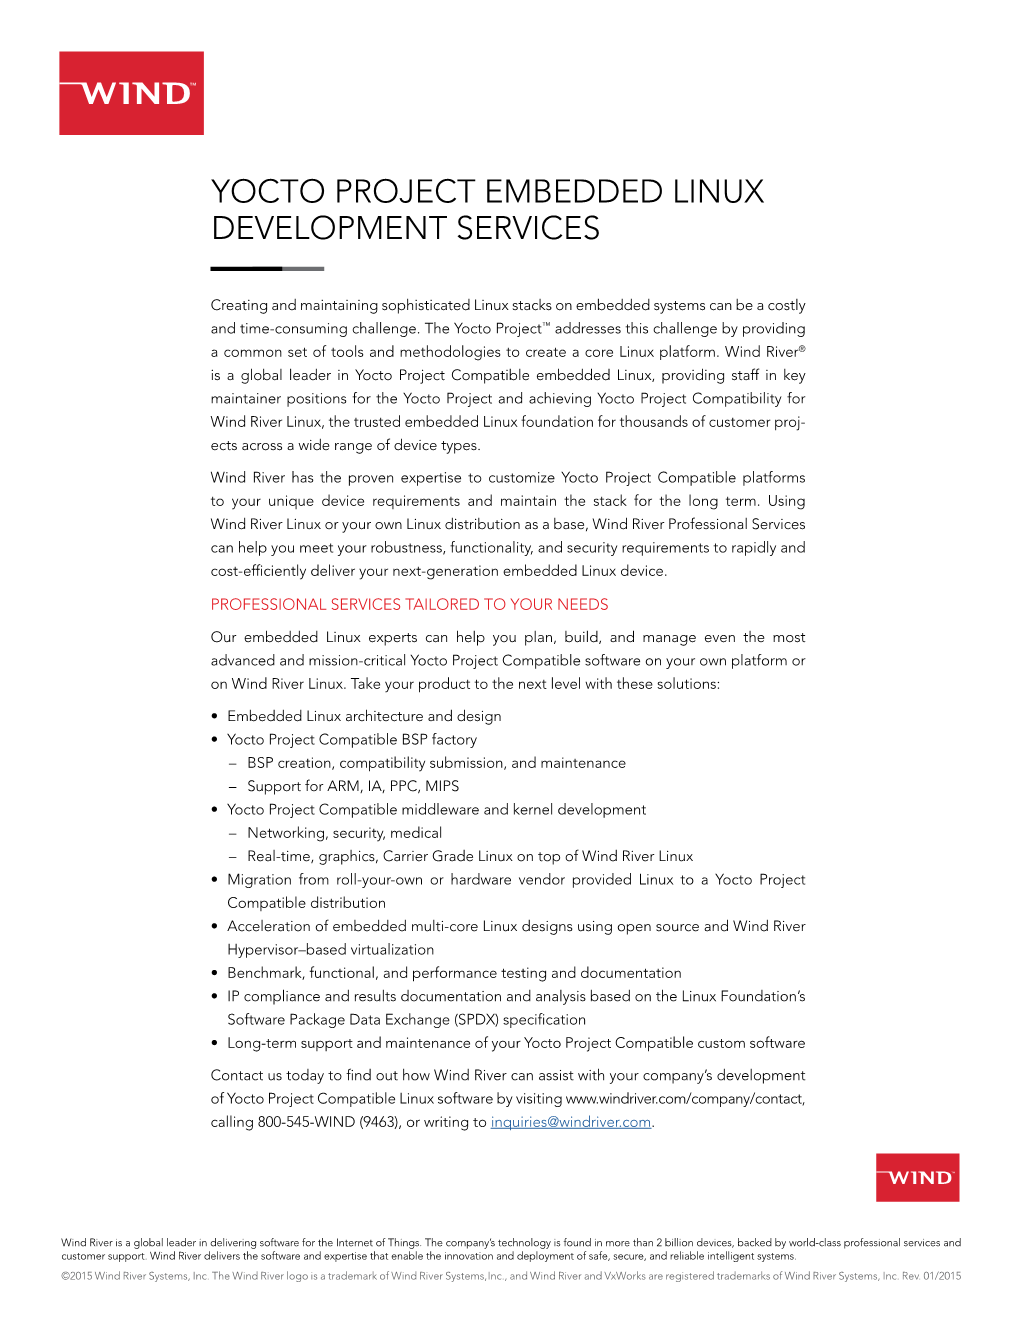 Yocto Project Embedded Linux Development Services